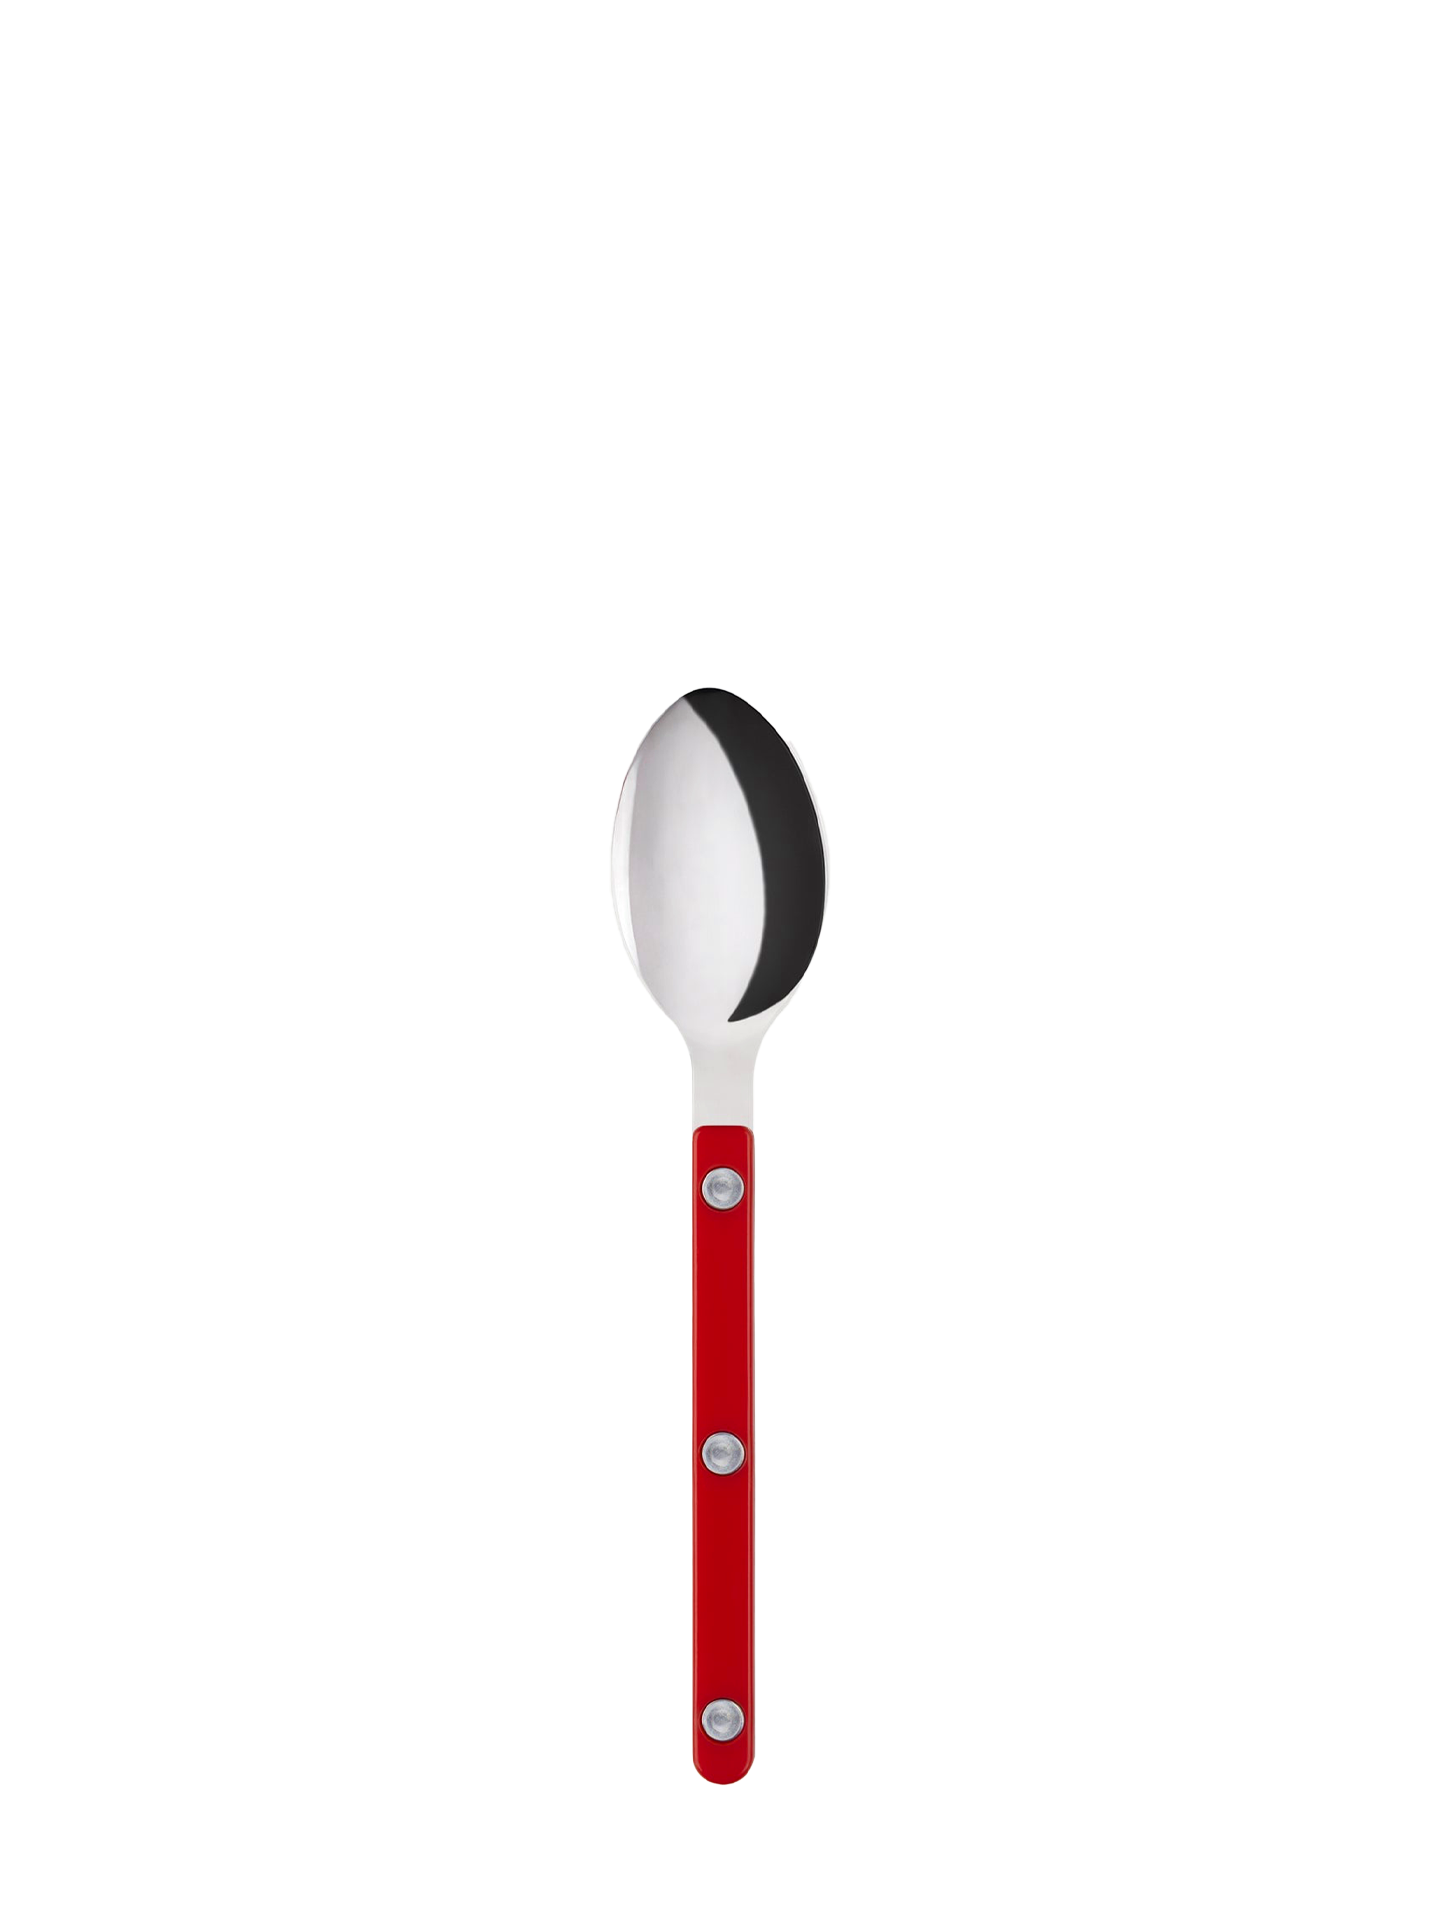 The tea spoon from the Bistrot collection in red is a new interpretation from the cutleries of the Parisian cafés and bistros. Stylish and fun, still practical and minimalist, this will fit perfectly with contemporary tableware with just little spoonful of French chic.